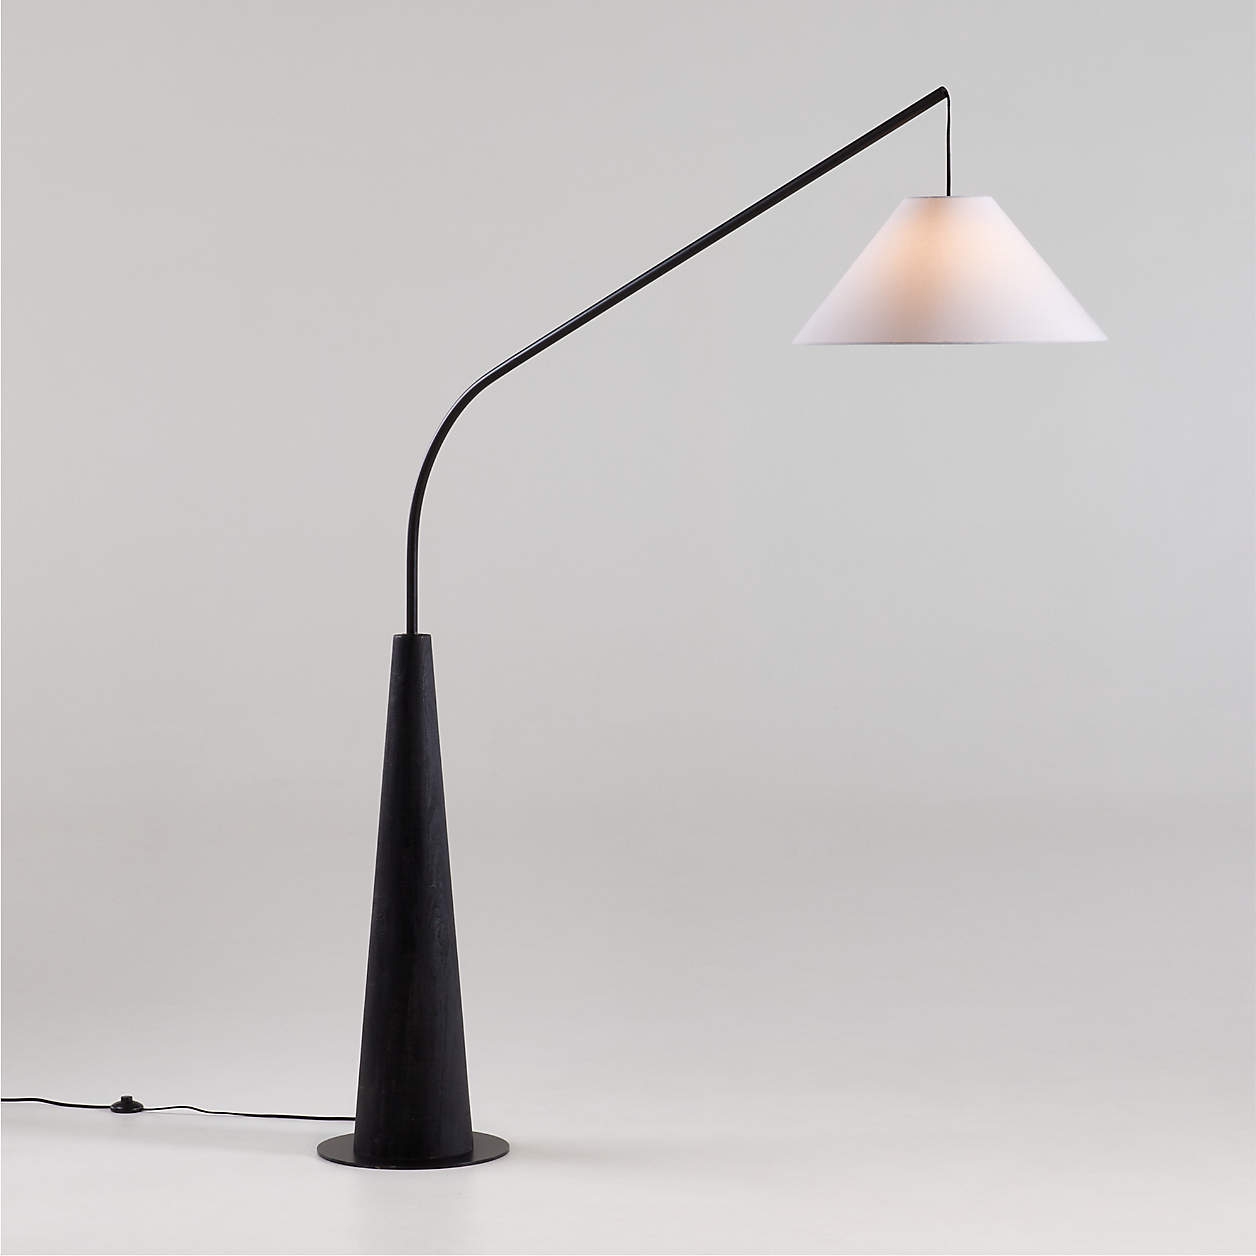 Gibson Black Hanging Arc Floor Lamp with White Shade - Image 1